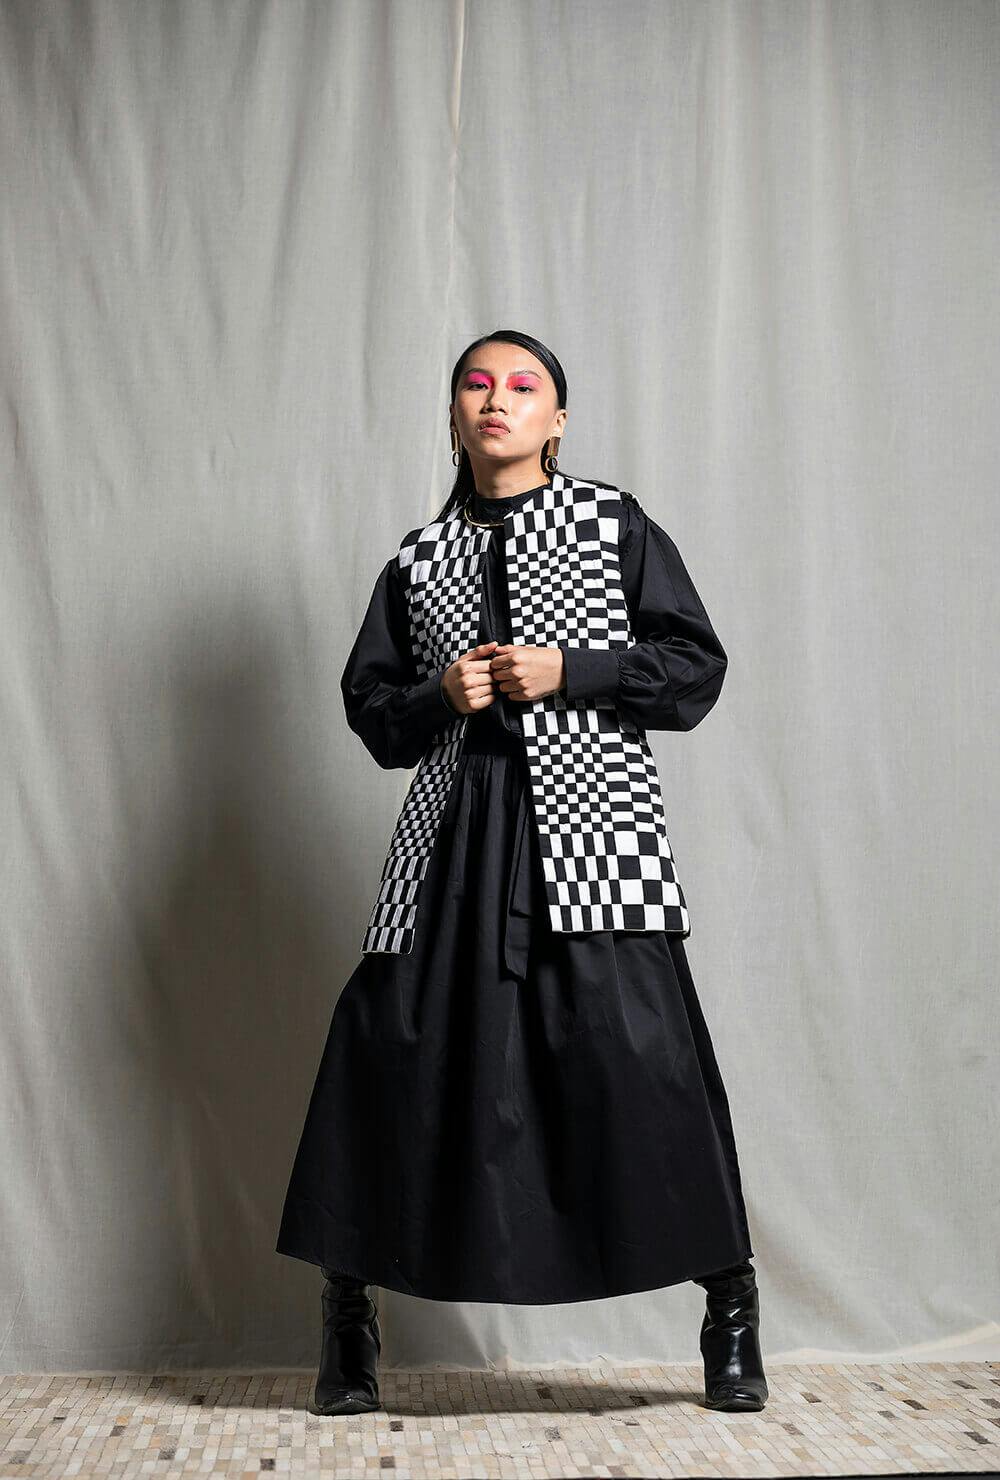 Woven Multi-Checkered Cutsleeve Jacket, a product by Corpora Studio